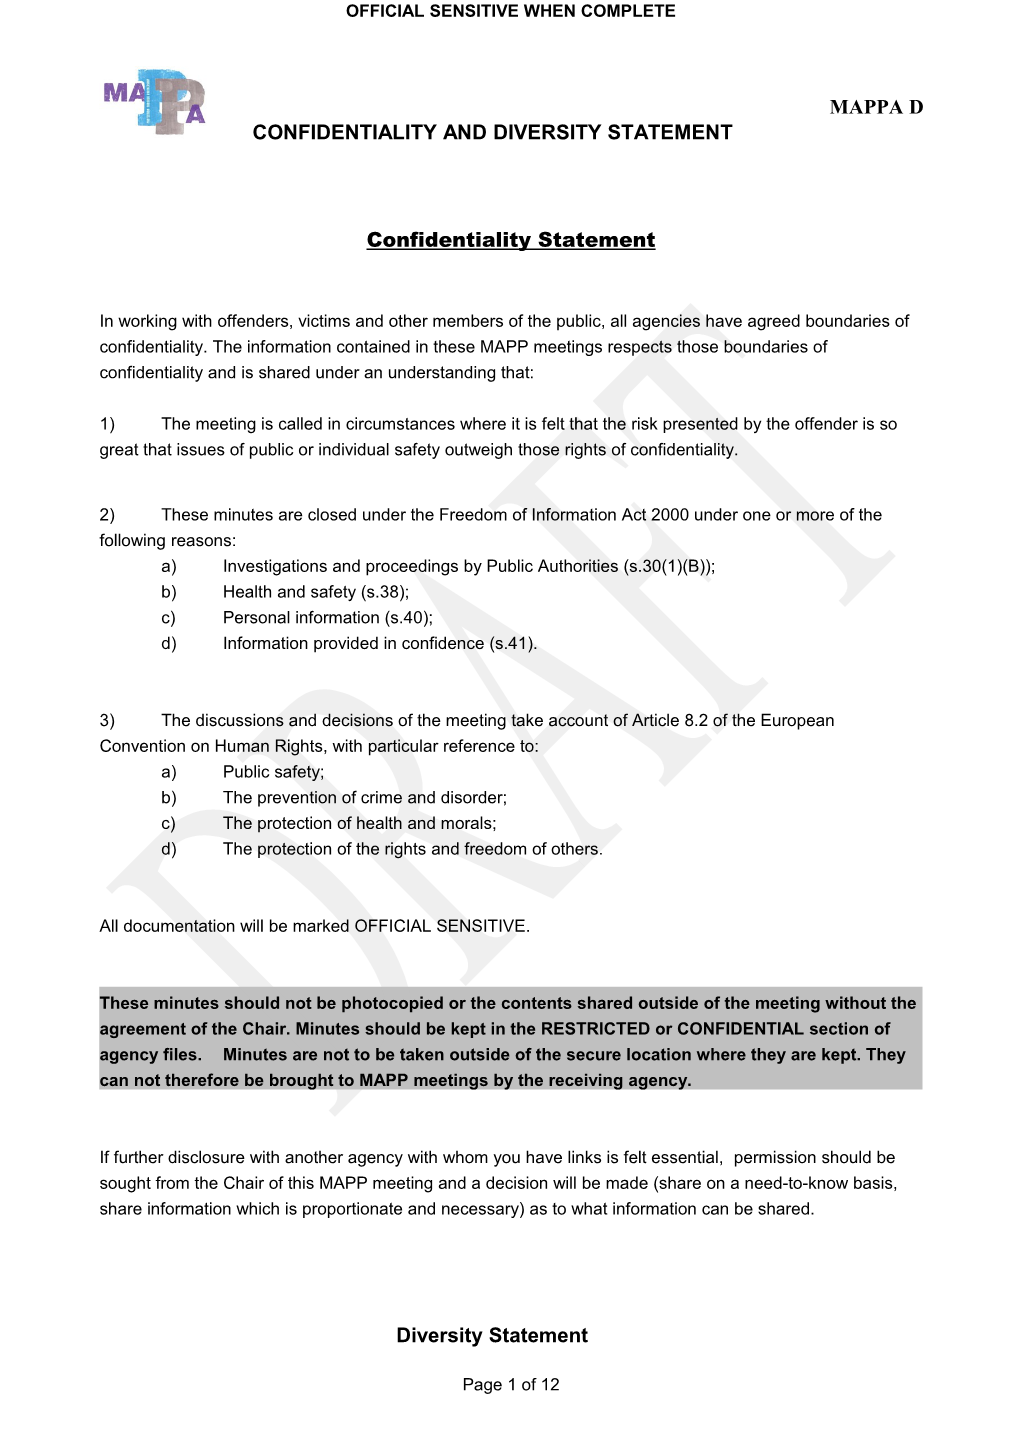 Confidentiality and Diversity Statement